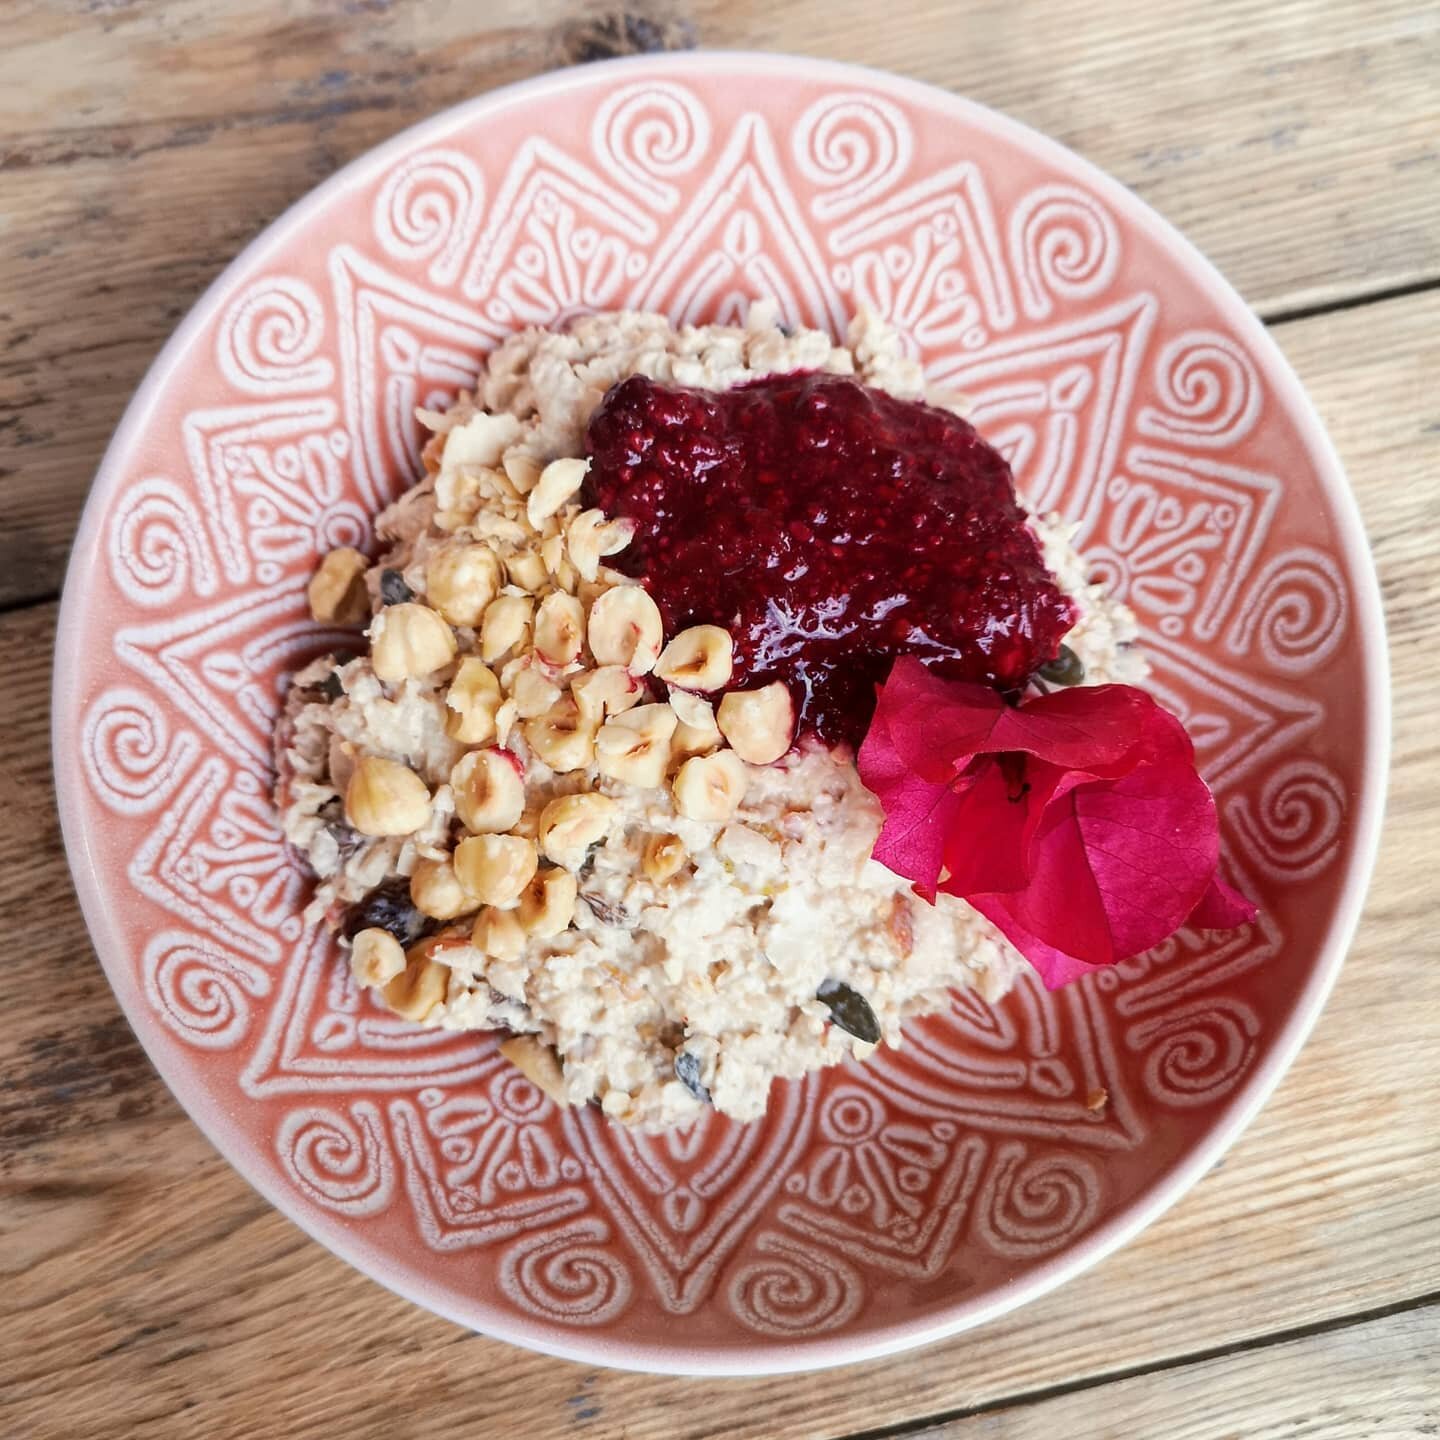 Looking for a new summer breakfast recipe that's completely satisfying yet also truly healthy? Try this Ultimate Bircher Muesli recipe (link in bio) 
*
*
*
*
#breakfast #breakfastideas #recipe #foodstagram #healthybreakfast #overnightoats #birchermue